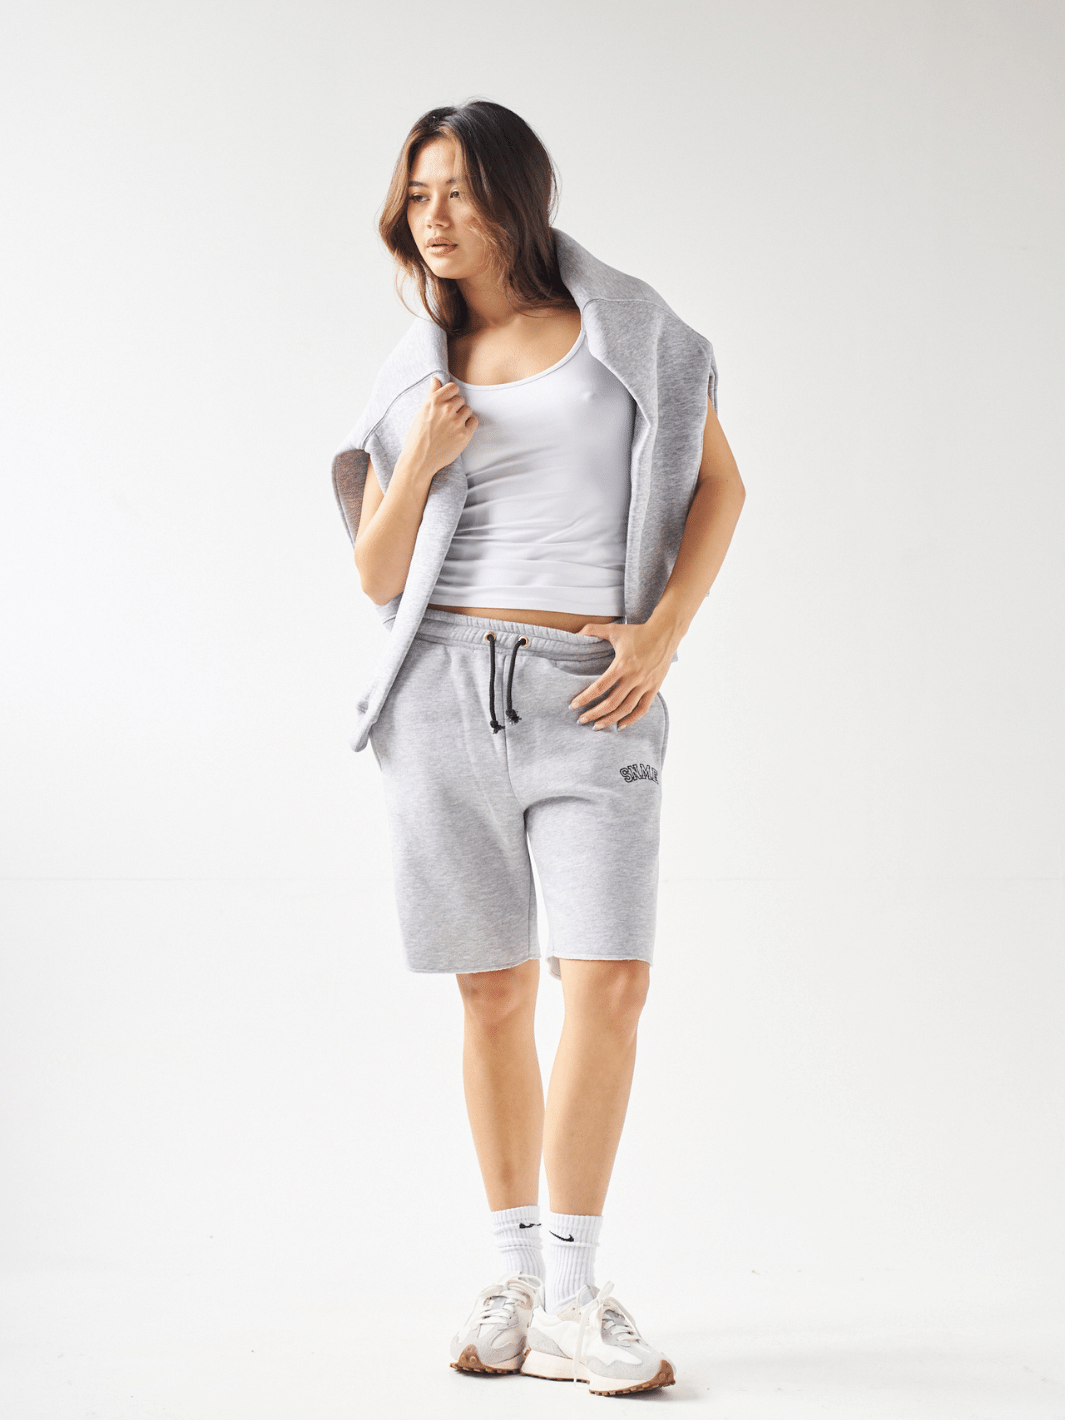 Sian Marie lounge S / Black Oversized SNME SPORTS Retro Tracksuit Set - Grey Marl - Small